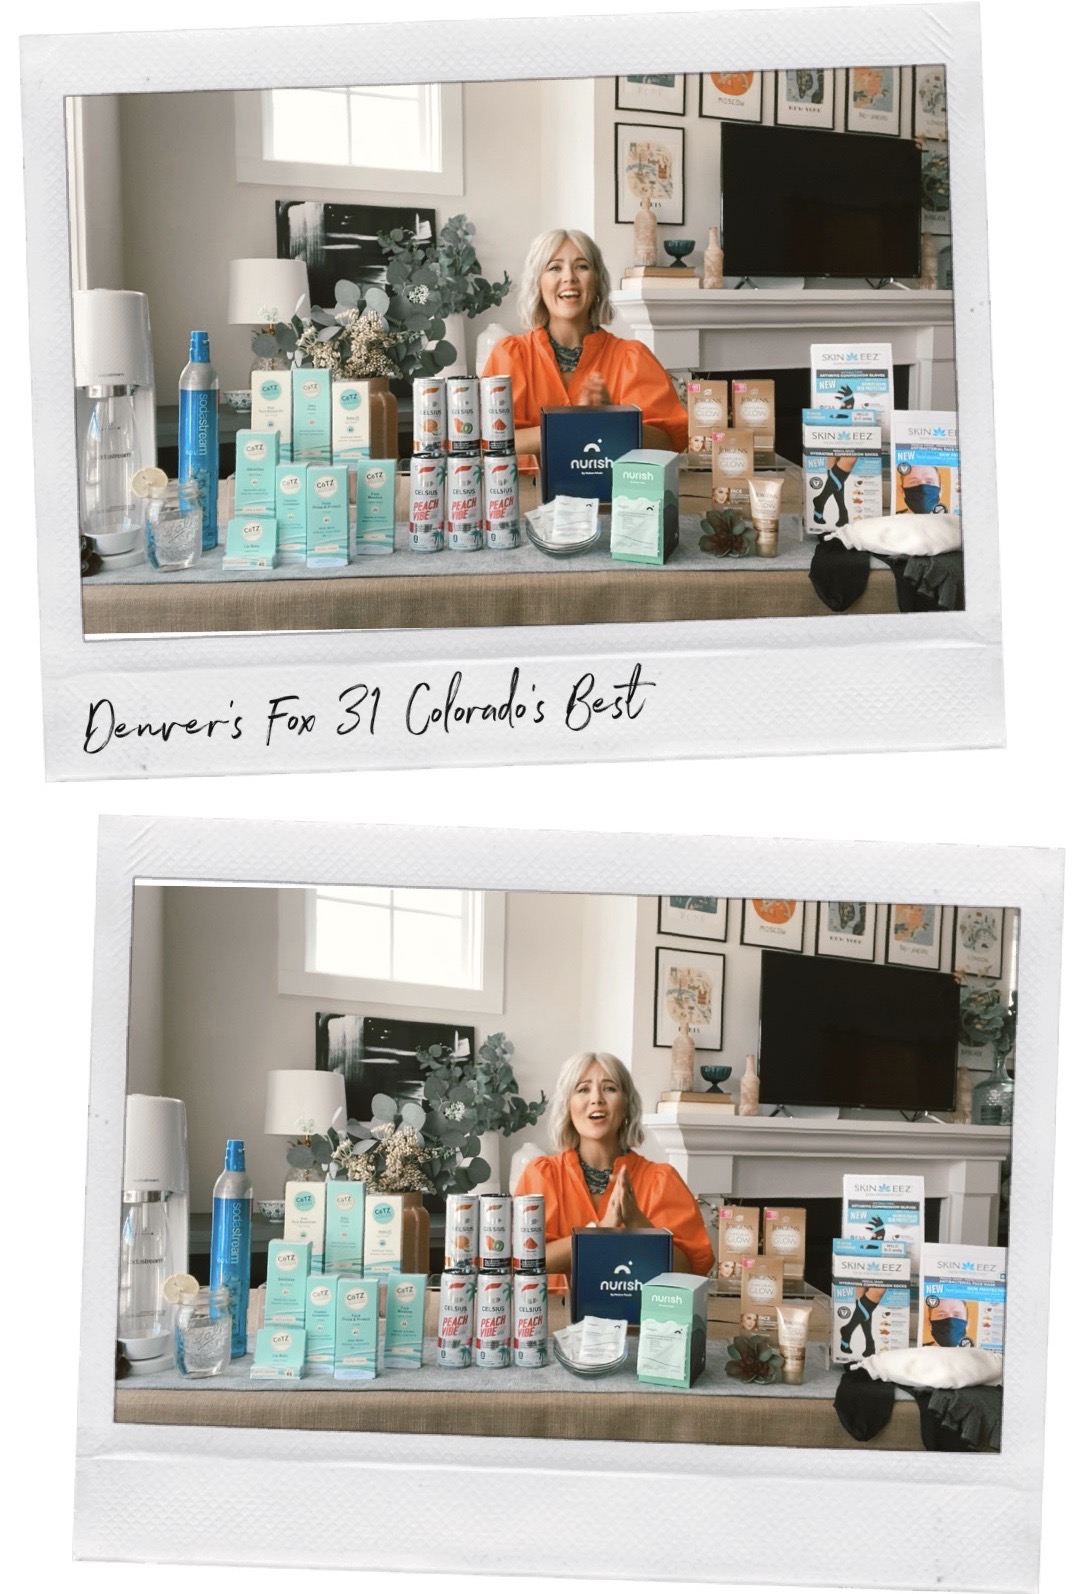 6 More Great Home & Family Wellness Products • Bourbon Blonde